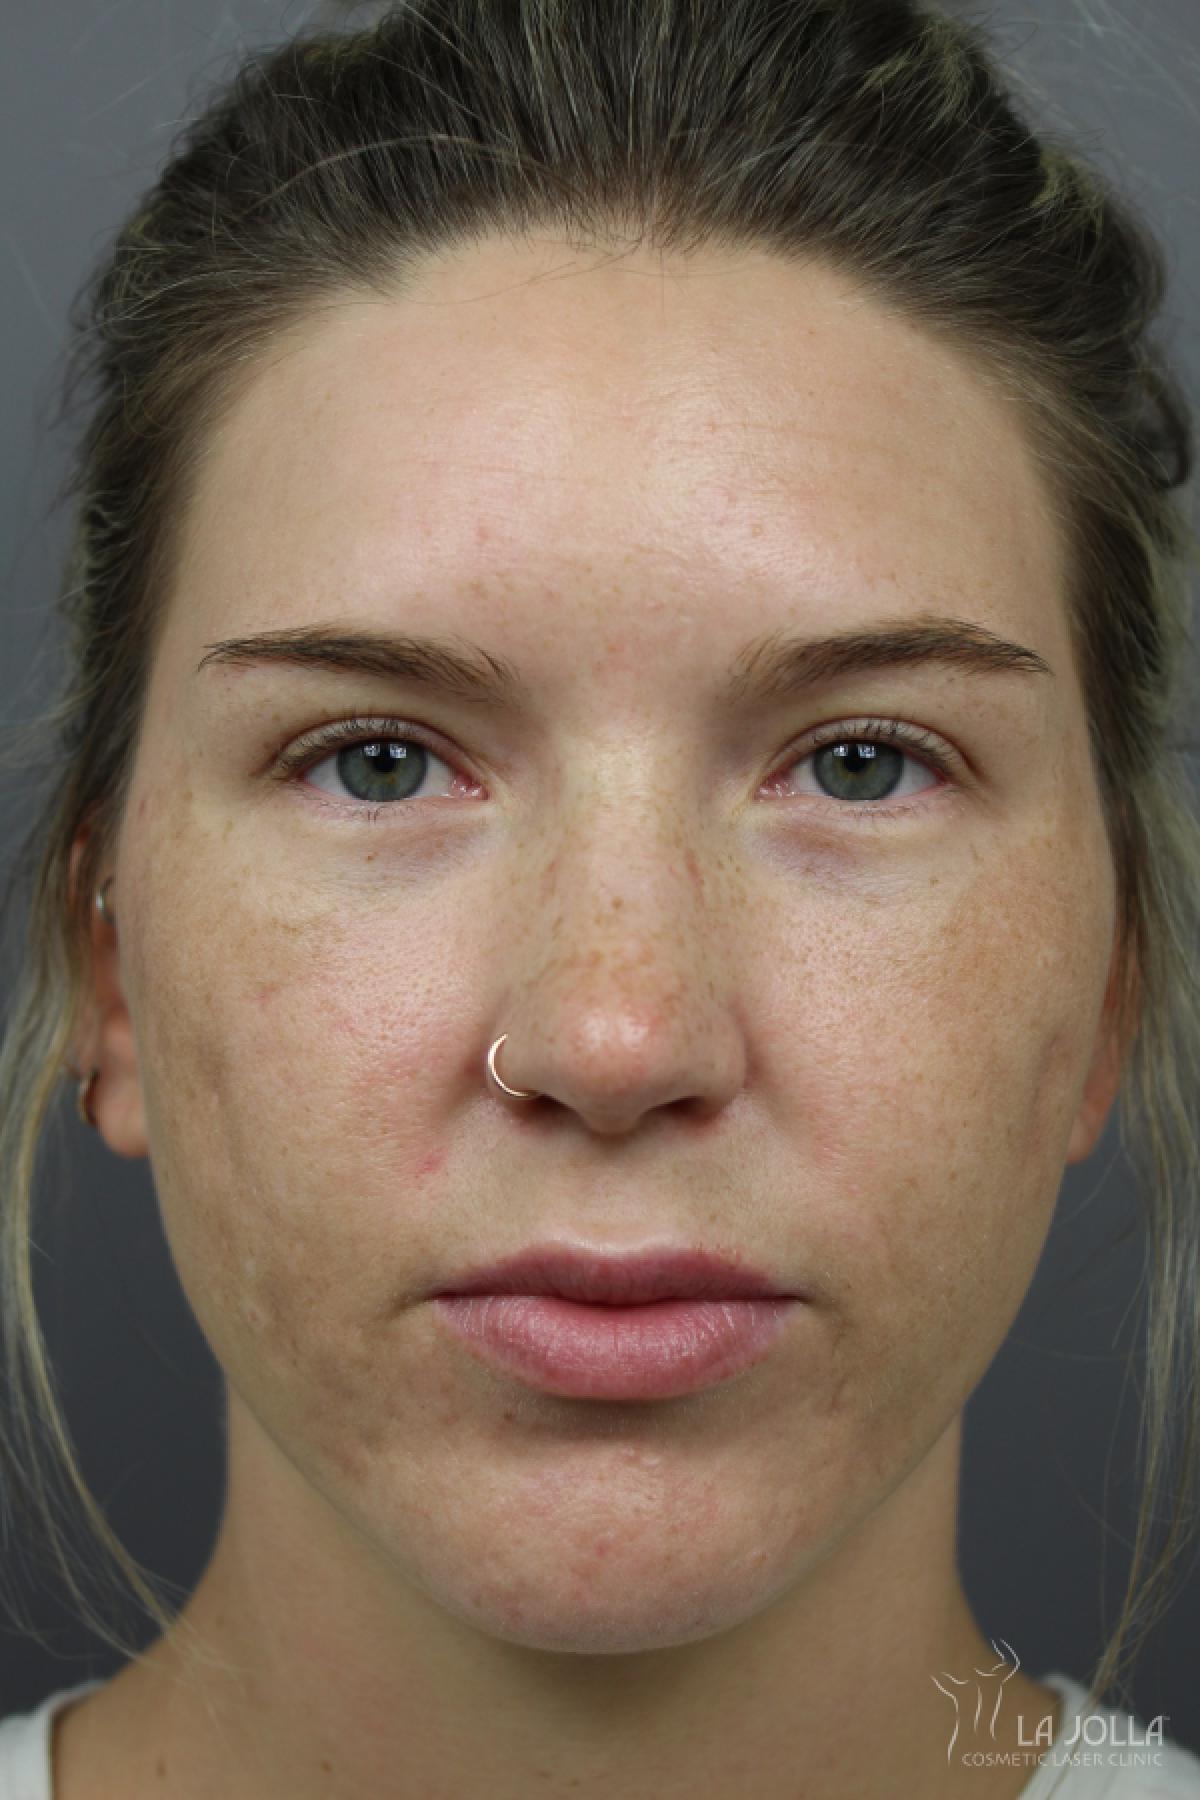 Acne Scars: Patient 2 - After 2